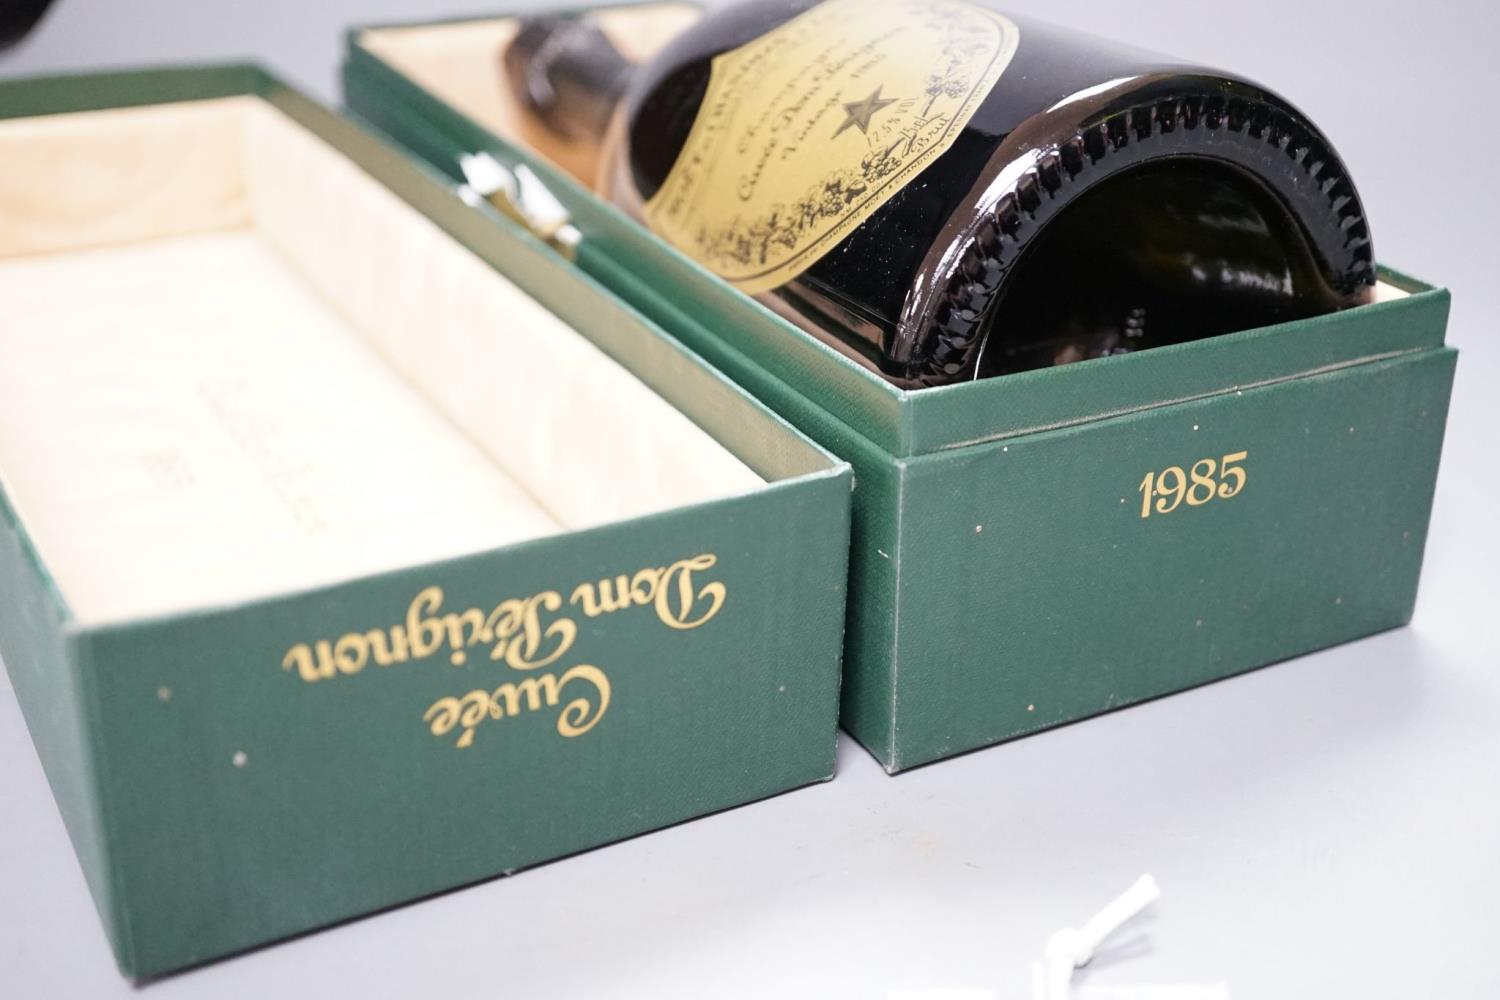 A single cased bottle of Dom Perignon, 1985 - Image 4 of 4